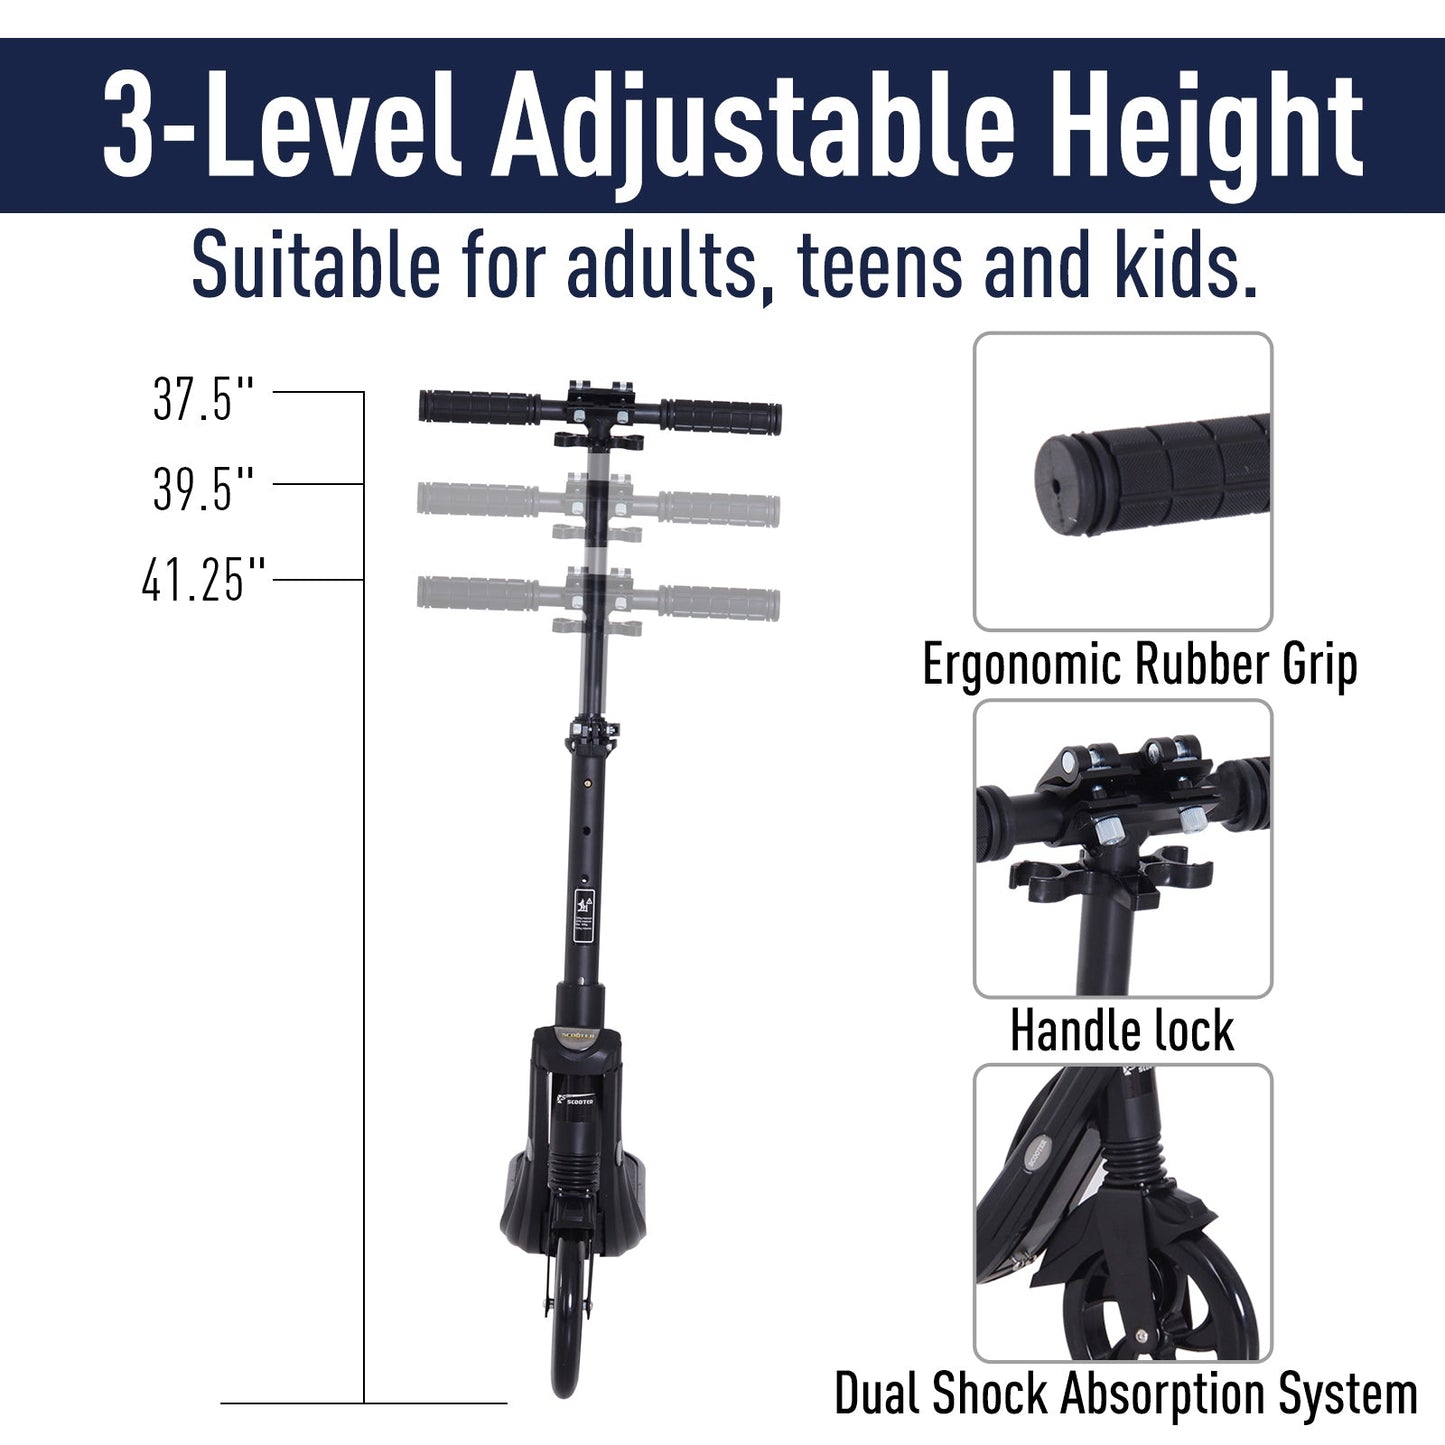 Foldable Kick Scooter with Adjustable Handlebar, Rear Brake, Dual Shock-Absorbing and Large Solid PU Tires Aluminum Frame for 14 Years Old and Up Teens Adult, Black at Gallery Canada